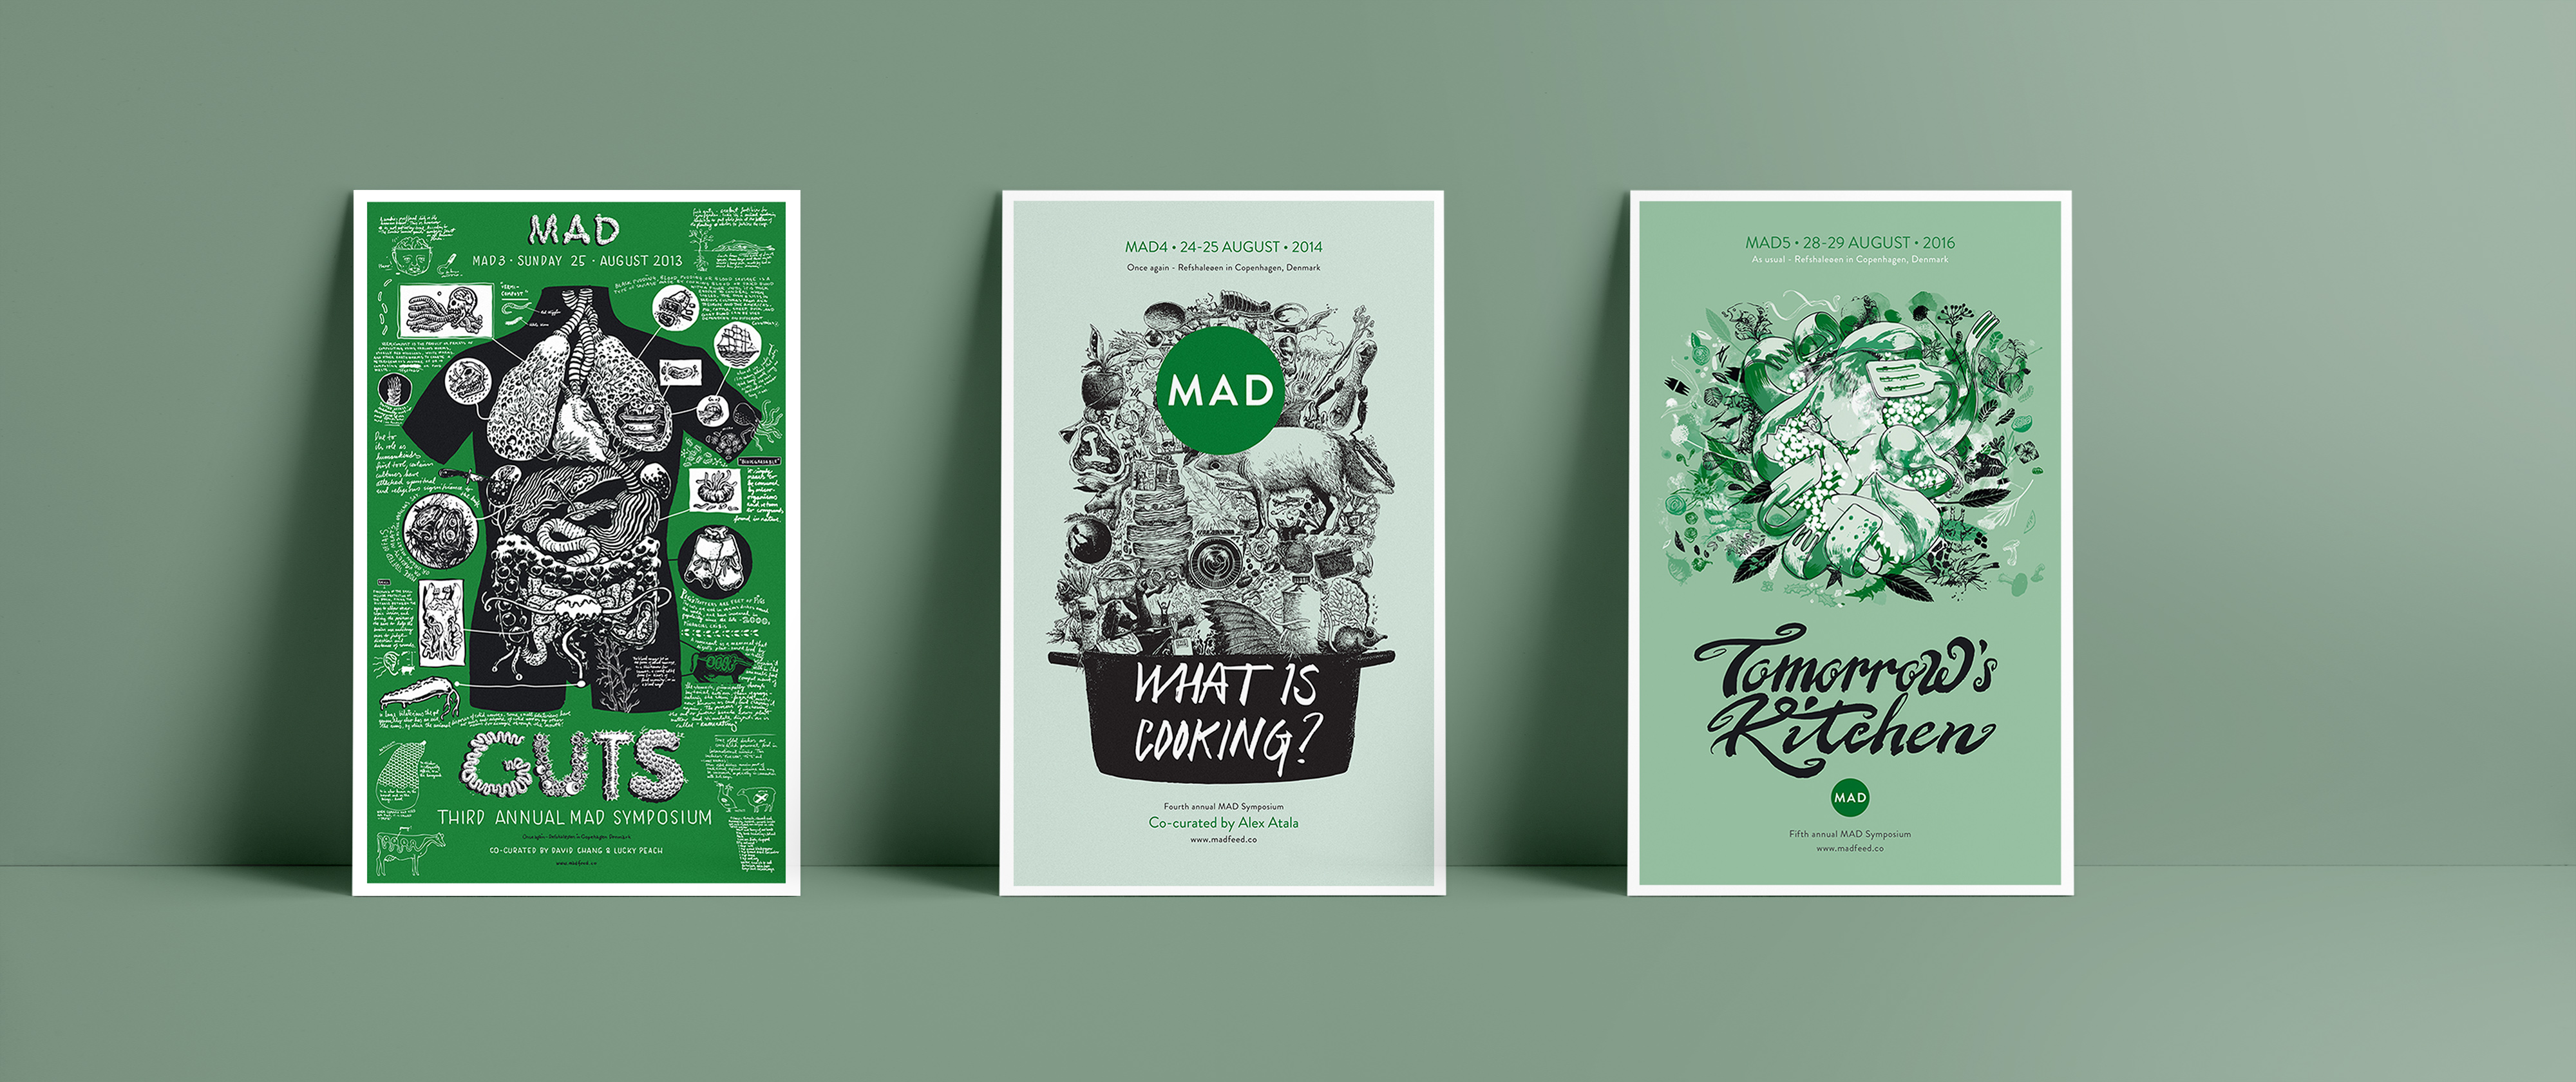 MAD_posters